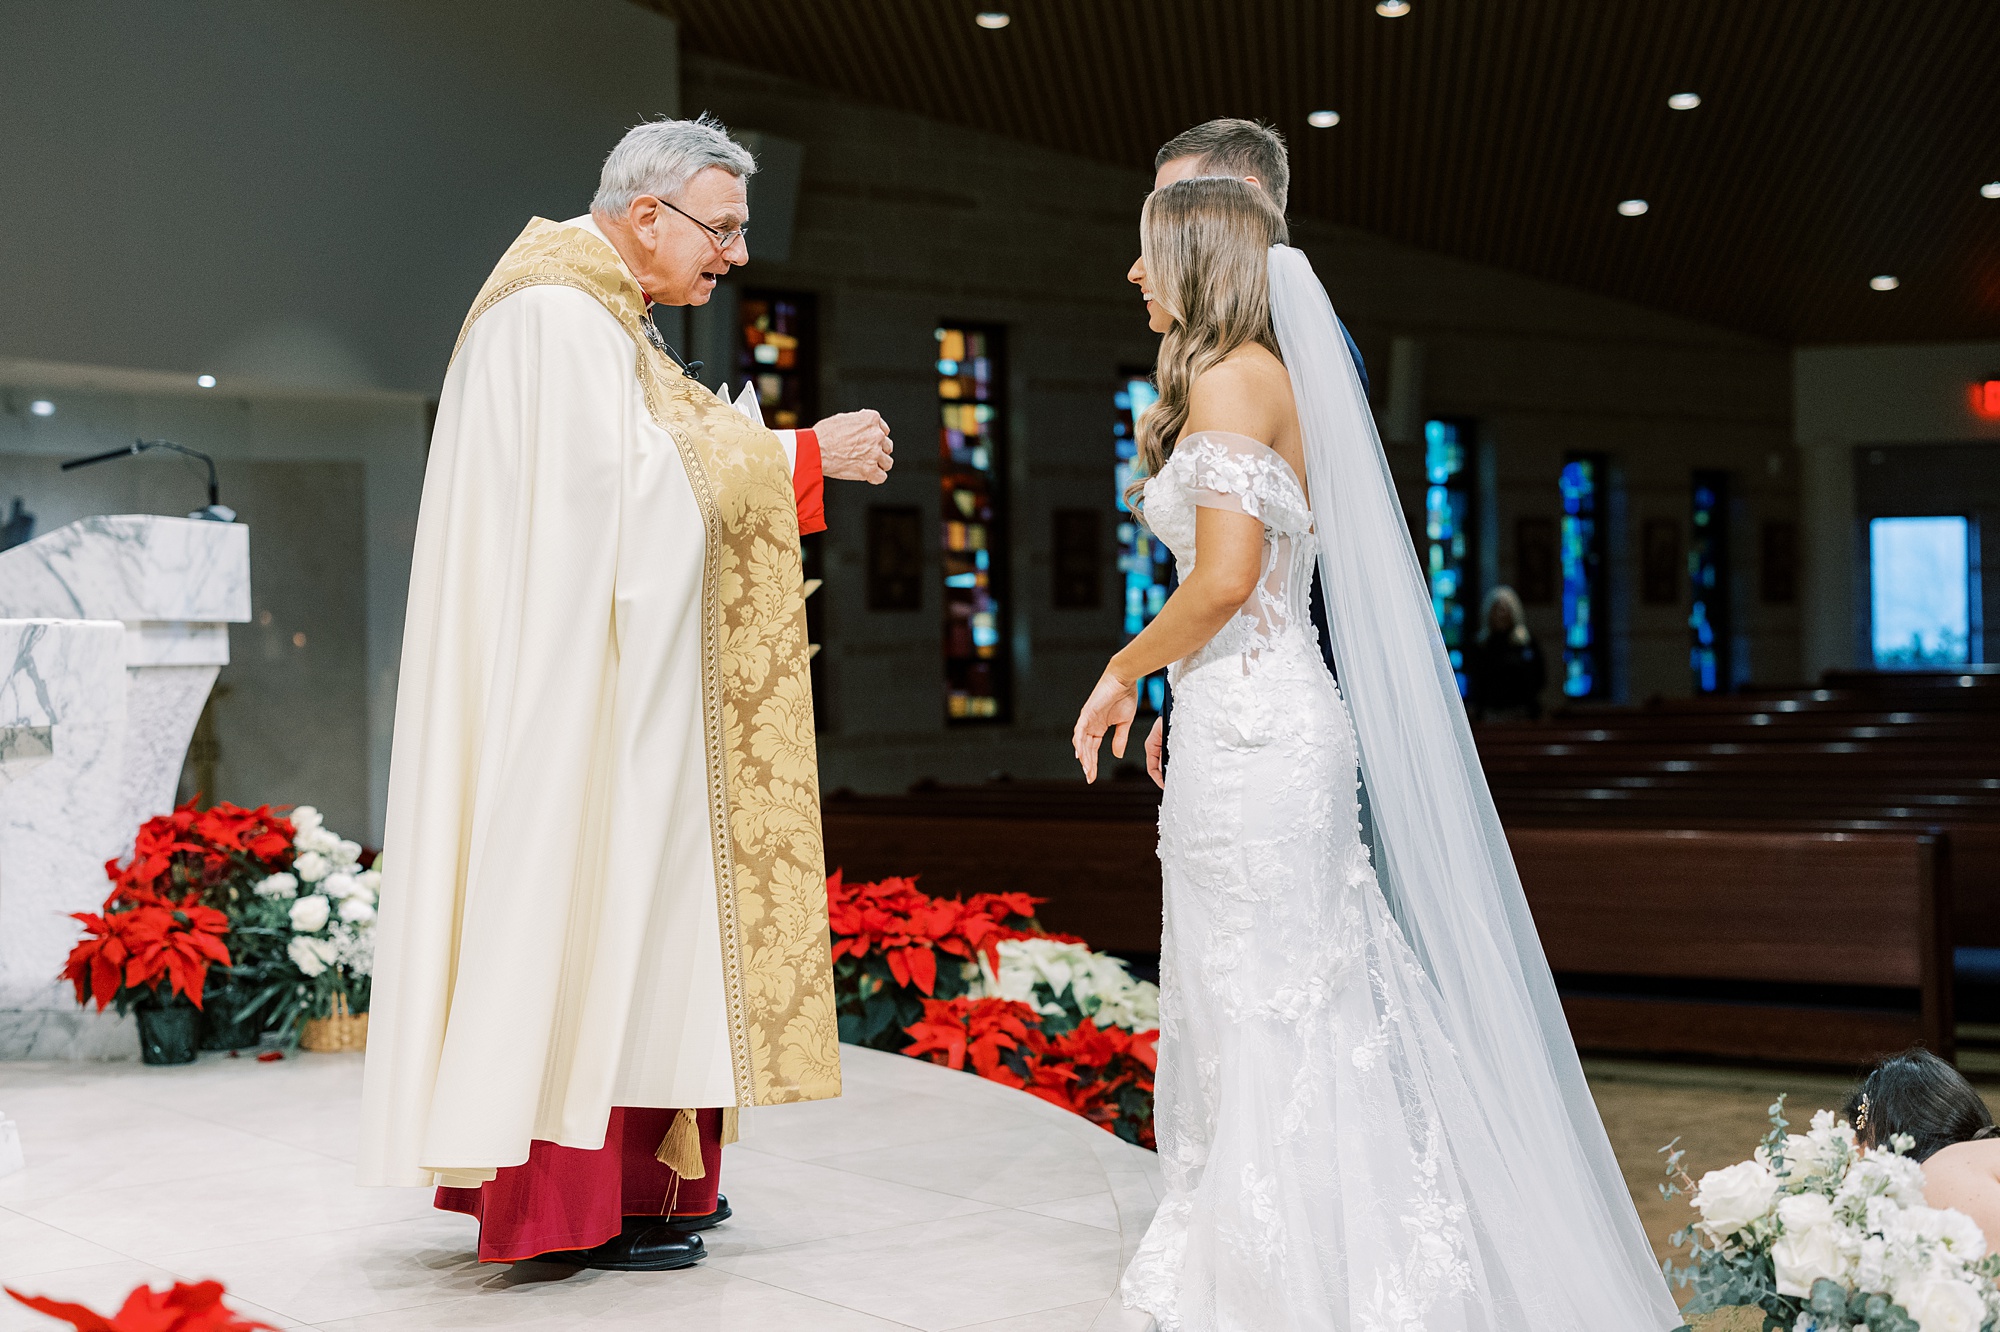 priest nods to bride and groom during wedding ceremony at St. Helen's Church in Westfield NJ